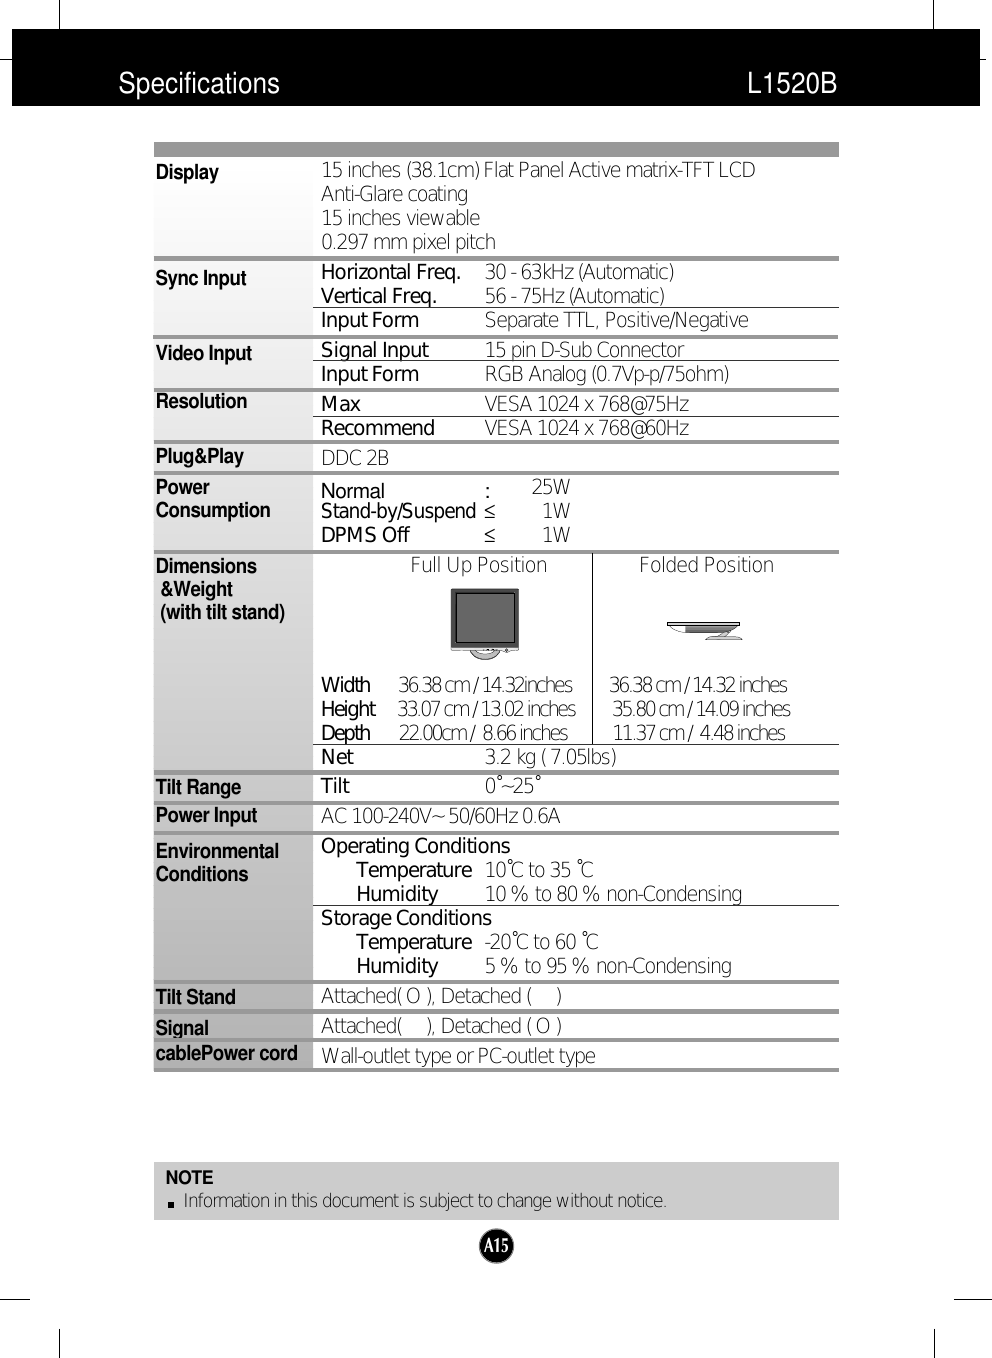 A15Specifications                                                                L1520BNOTEInformation in this document is subject to change without notice.15 inches (38.1cm) Flat Panel Active matrix-TFT LCD Anti-Glare coating15 inches viewable0.297 mm pixel pitchHorizontal Freq. 30 - 63kHz (Automatic)Vertical Freq. 56 - 75Hz (Automatic)Input Form Separate TTL, Positive/NegativeSignal Input 15 pin D-Sub ConnectorInput Form RGB Analog (0.7Vp-p/75ohm)Max VESA 1024 x 768@75Hz Recommend VESA 1024 x 768@60HzDDC 2BNormal :25WStand-by/Suspend≤1WDPMS Off ≤1WFull Up Position                 Folded PositionWidth   36.38 cm / 14.32inches         36.38 cm / 14.32 inchesHeight   33.07 cm / 13.02 inches         35.80 cm / 14.09 inchesDepth  22.00cm /  8.66 inches           11.37 cm /  4.48 inchesNet 3.2 kg ( 7.05lbs)Tilt 0˚~25˚AC 100-240V~ 50/60Hz 0.6AOperating ConditionsTemperature 10˚C to 35 ˚CHumidity 10 % to 80 % non-CondensingStorage ConditionsTemperature -20˚C to 60 ˚CHumidity 5 % to 95 % non-CondensingAttached( O ), Detached (     )Attached(     ), Detached ( O )Wall-outlet type or PC-outlet typeDisplaySync InputVideo InputResolutionPlug&amp;PlayPowerConsumptionDimensions&amp;Weight(with tilt stand)Tilt RangePower InputEnvironmentalConditionsTilt StandSignalcablePower cord 